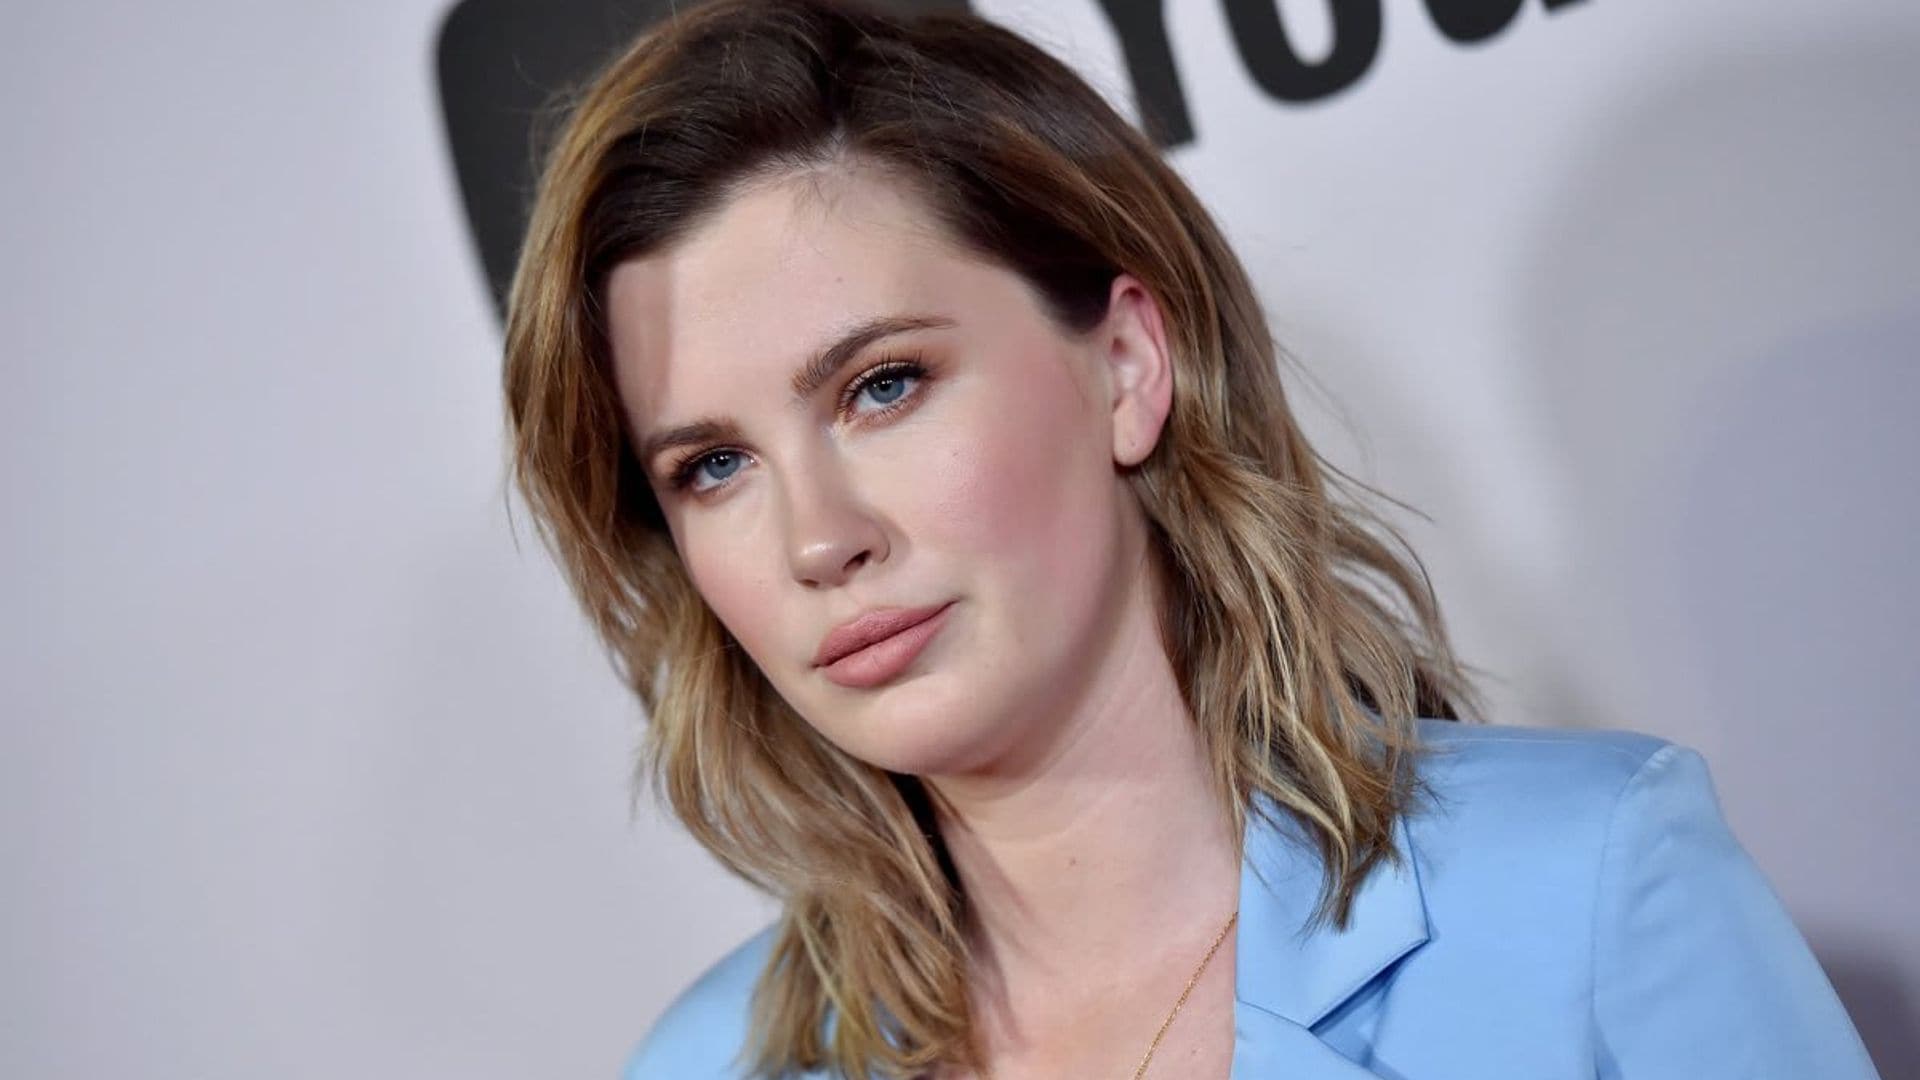 Ireland Baldwin opens up about her severe anxiety: ‘Don’t let people make you feel guilty’